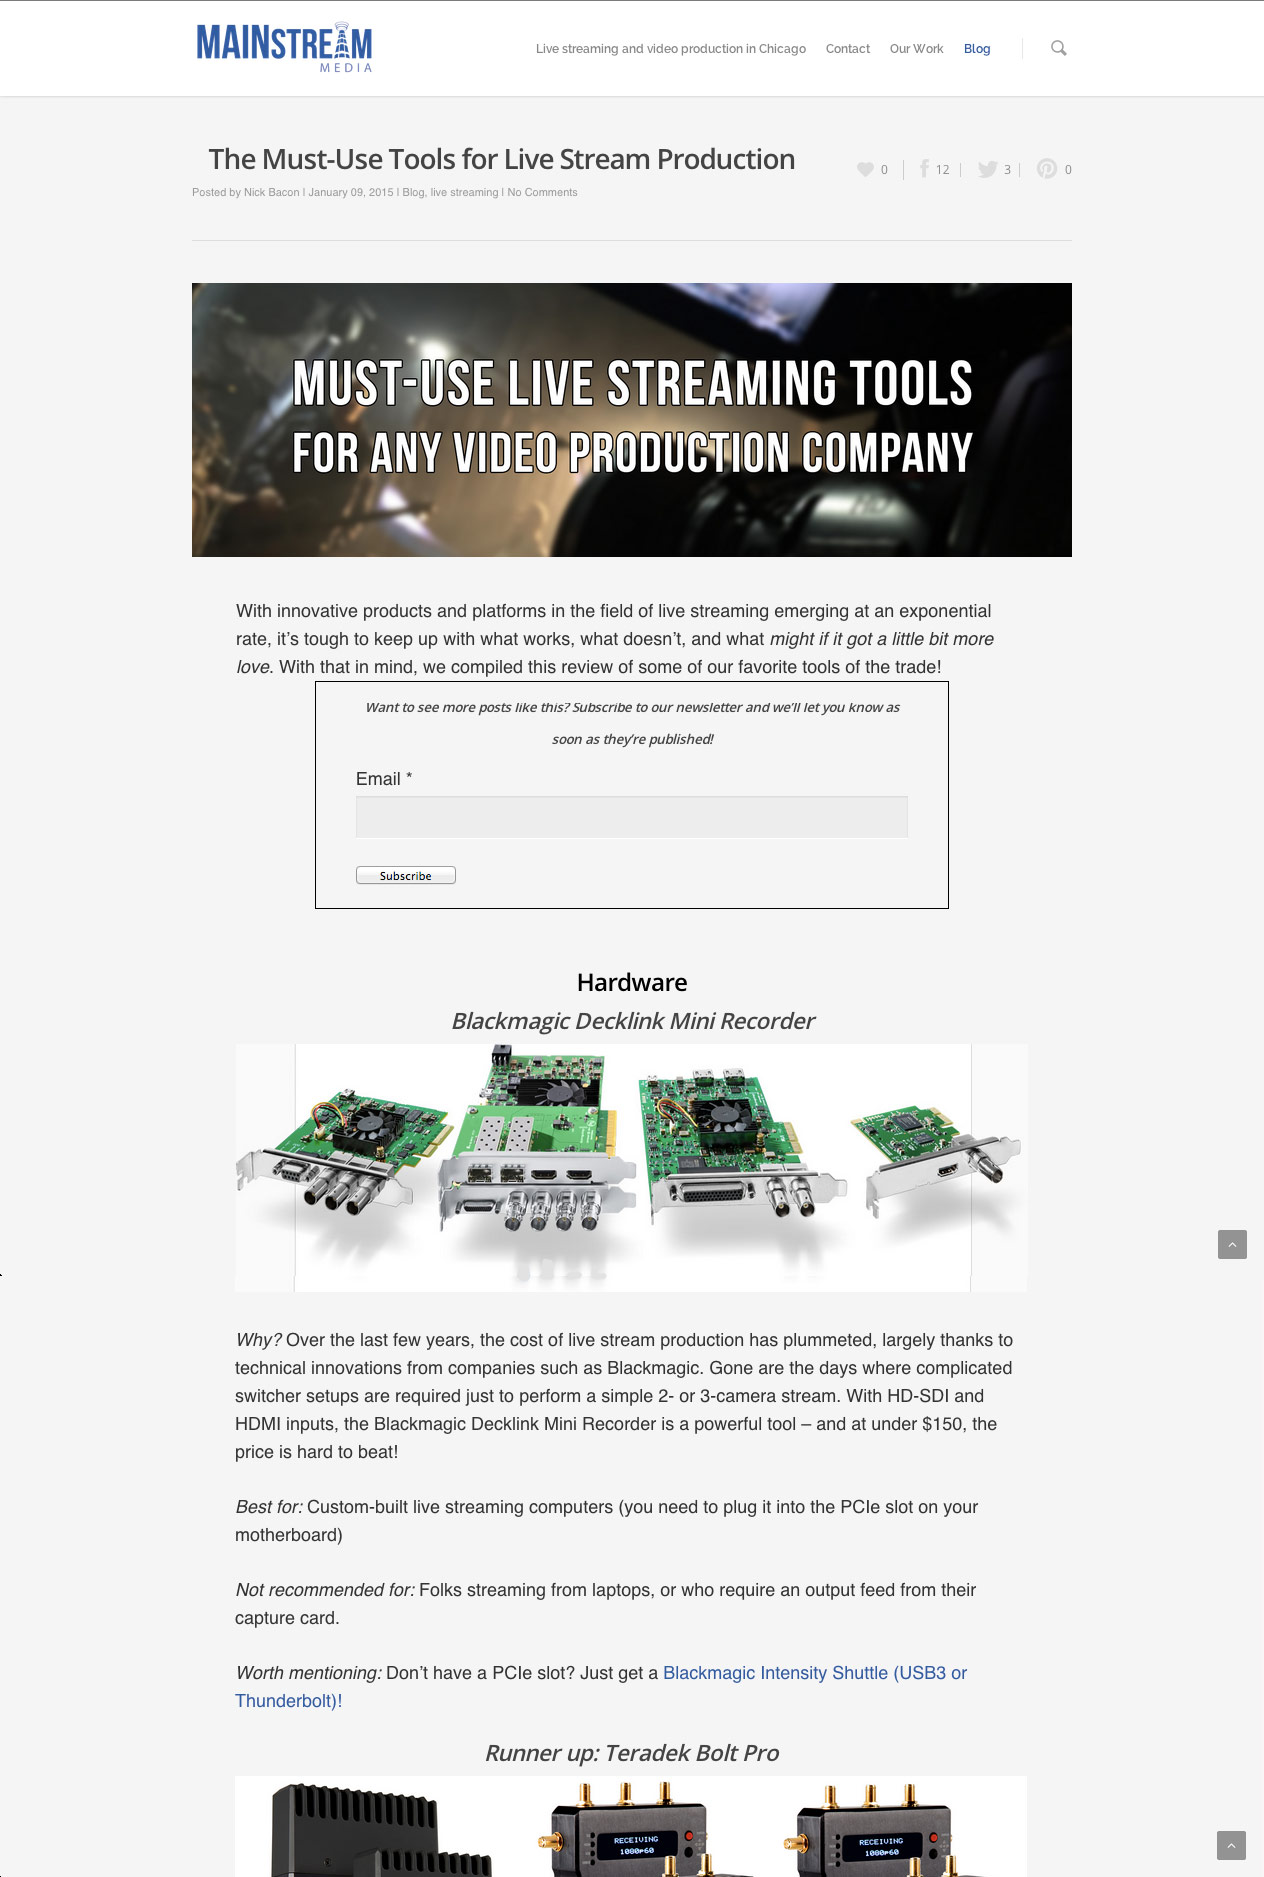 Important Tools for Live Streaming Production